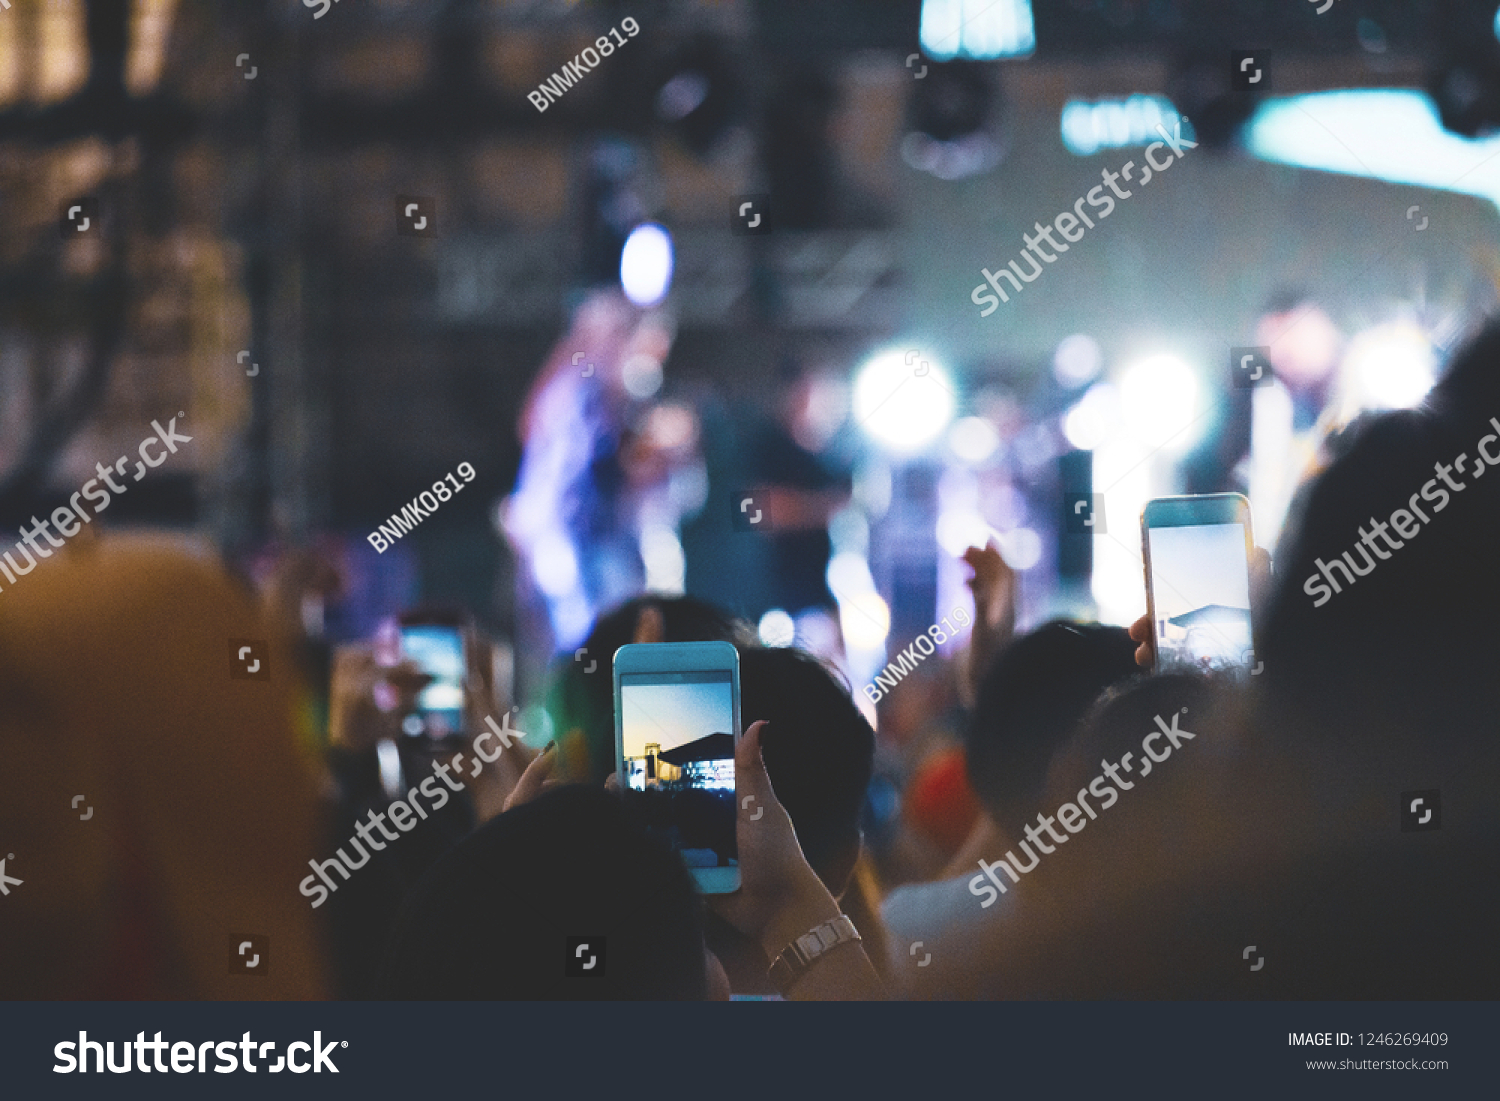 Hand with a smartphone records live music festival, Taking photo of concert stage, live concert, music festival #1246269409